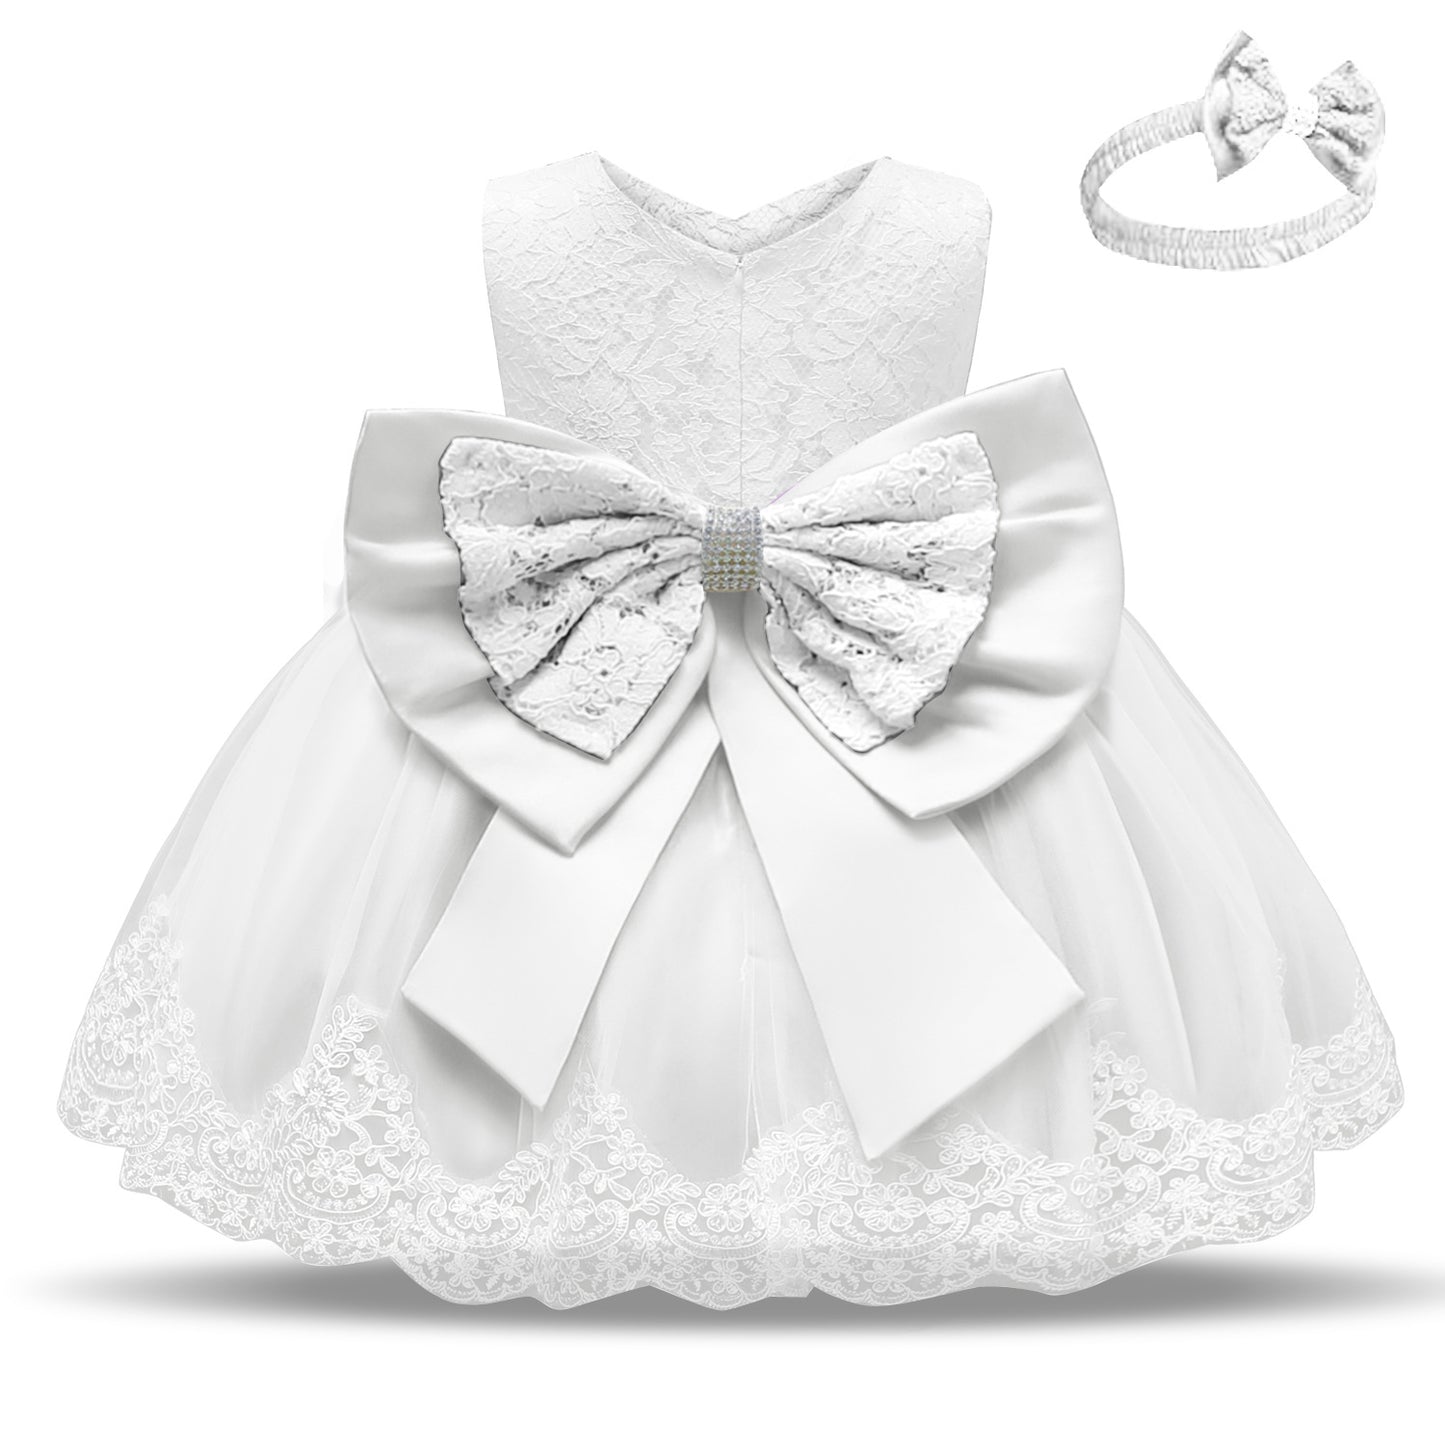 Baby One Year Old Dress Bow Tutu Skirt Baby Toddler Lace Dress